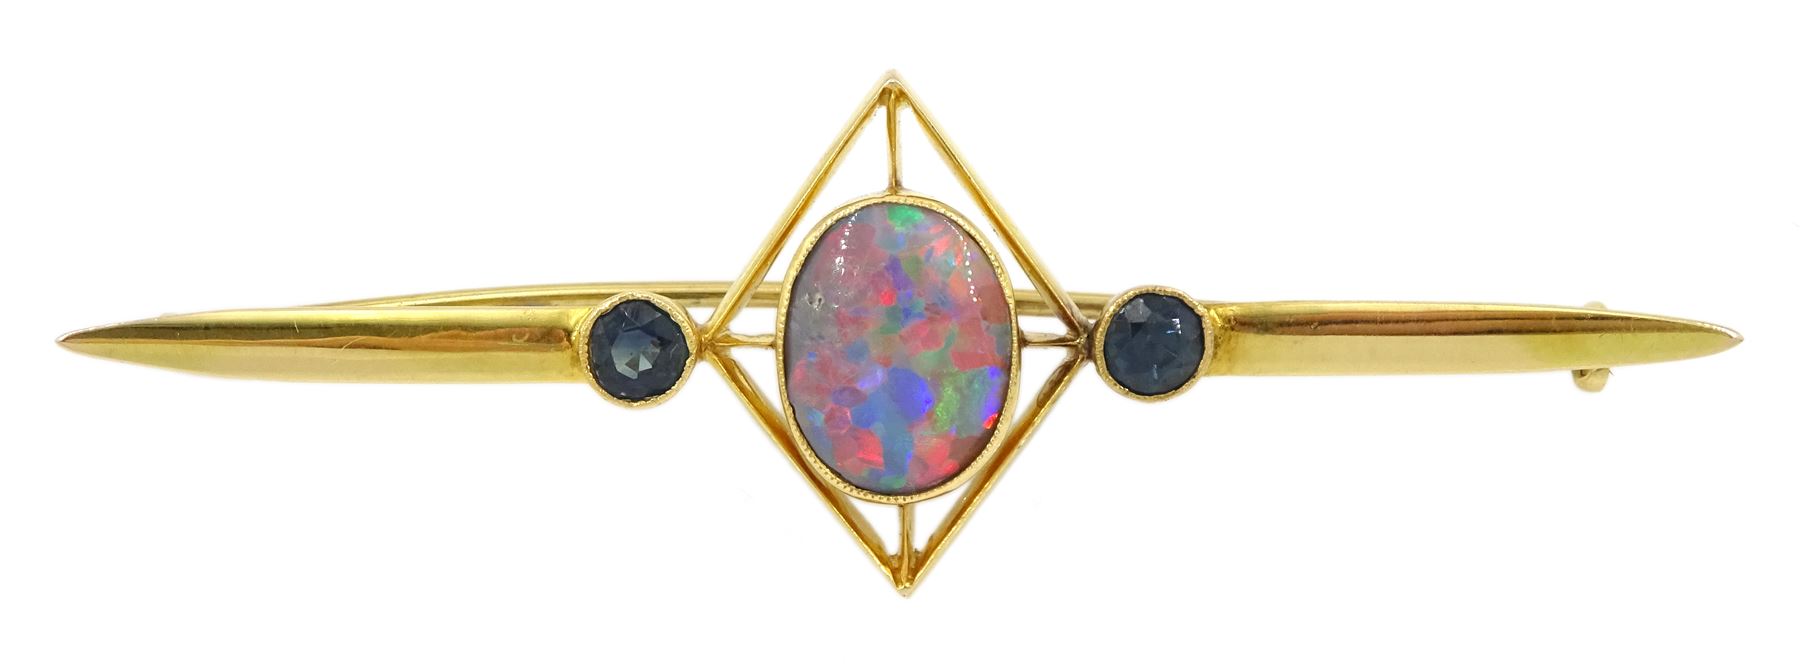 Early 20th century gold opal and sapphire bar brooch - Image 2 of 4